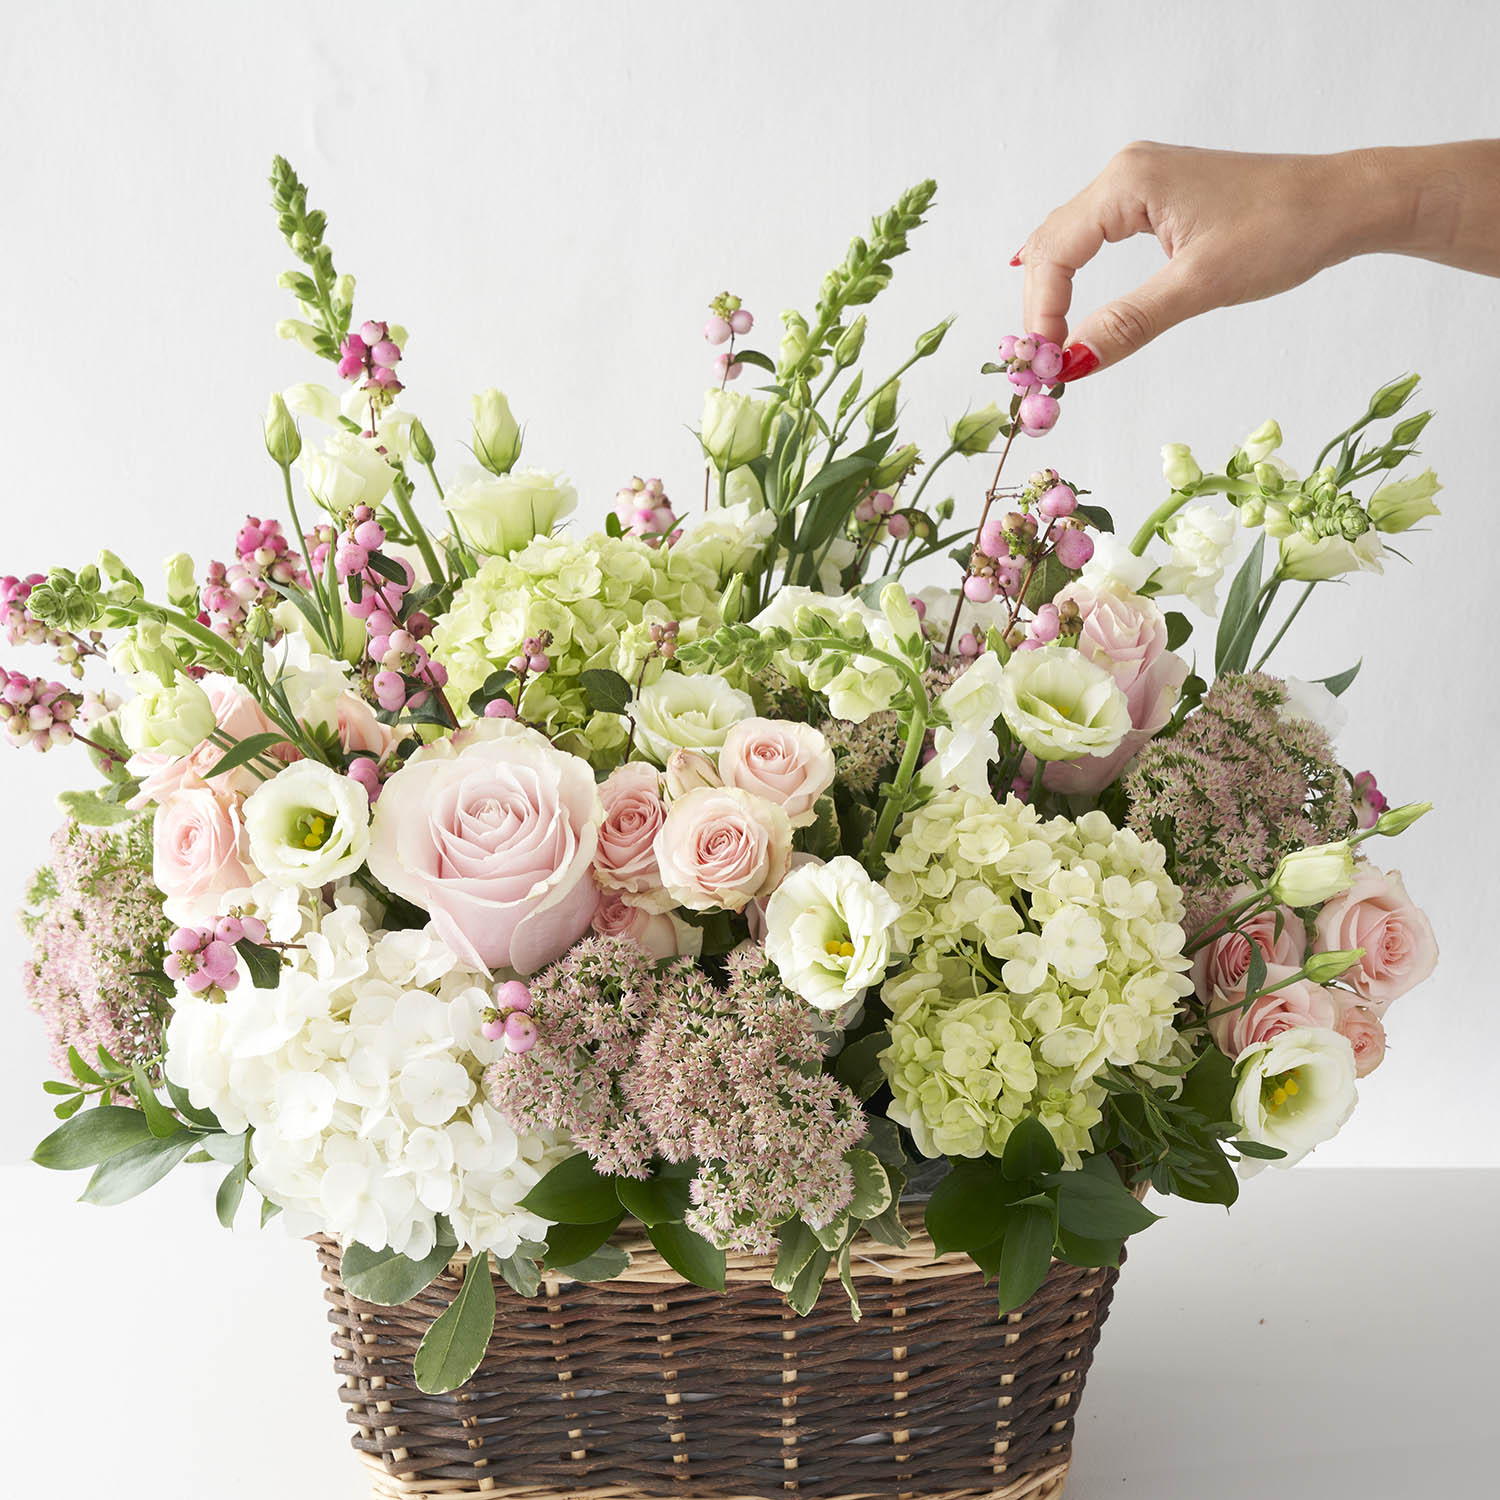 Woman's hand arranging pale pink, soft green and white flowers in a natural basket.